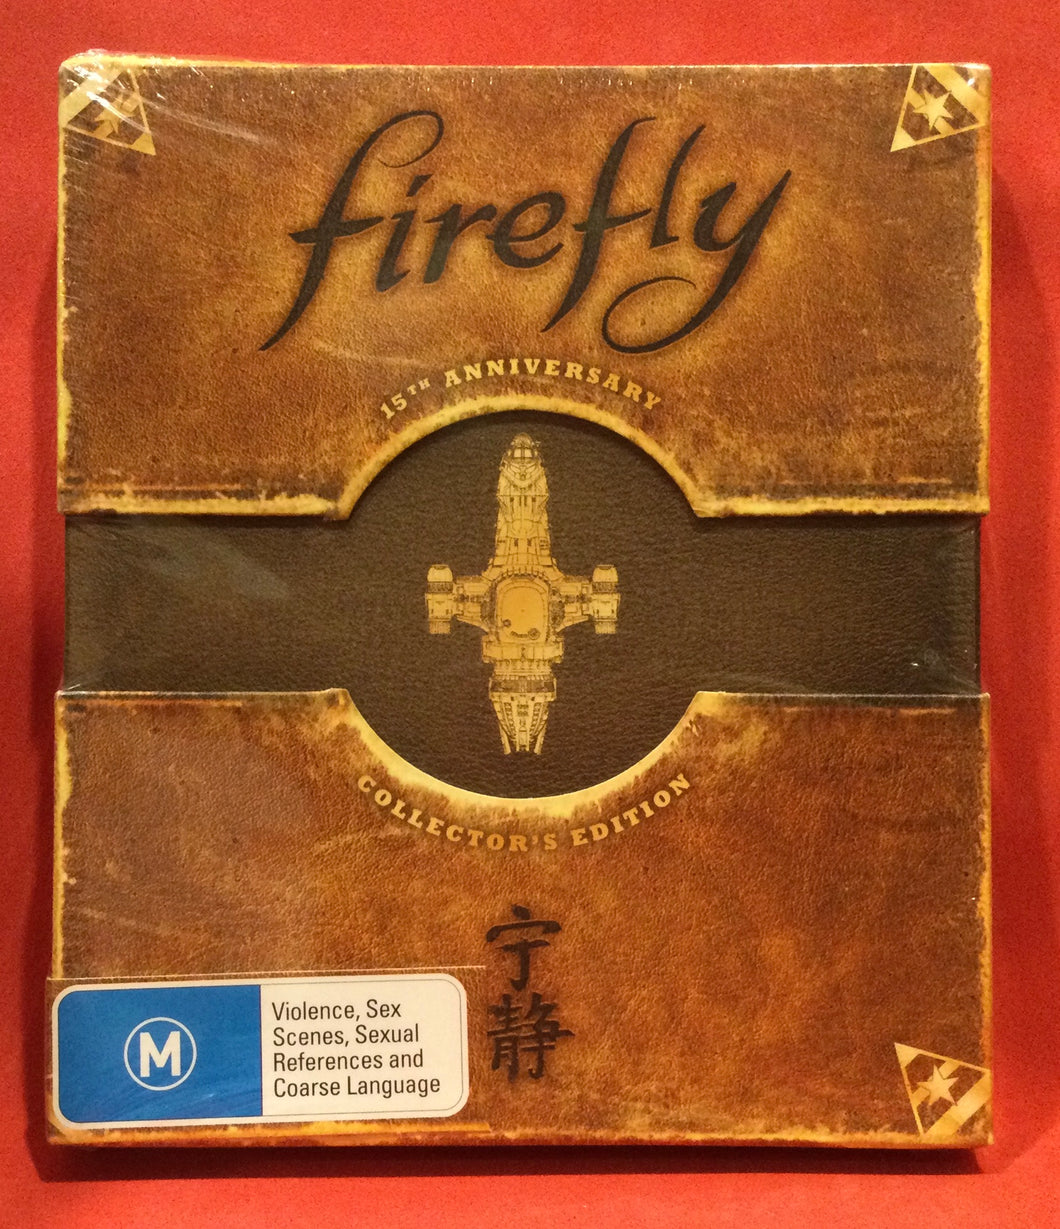 FIREFLY - COMPLETE SERIES - 15TH ANNIVERSARY COLLECTOR'S EDITION - BLU-RAY - 3 DVD DISCS (SEALED)